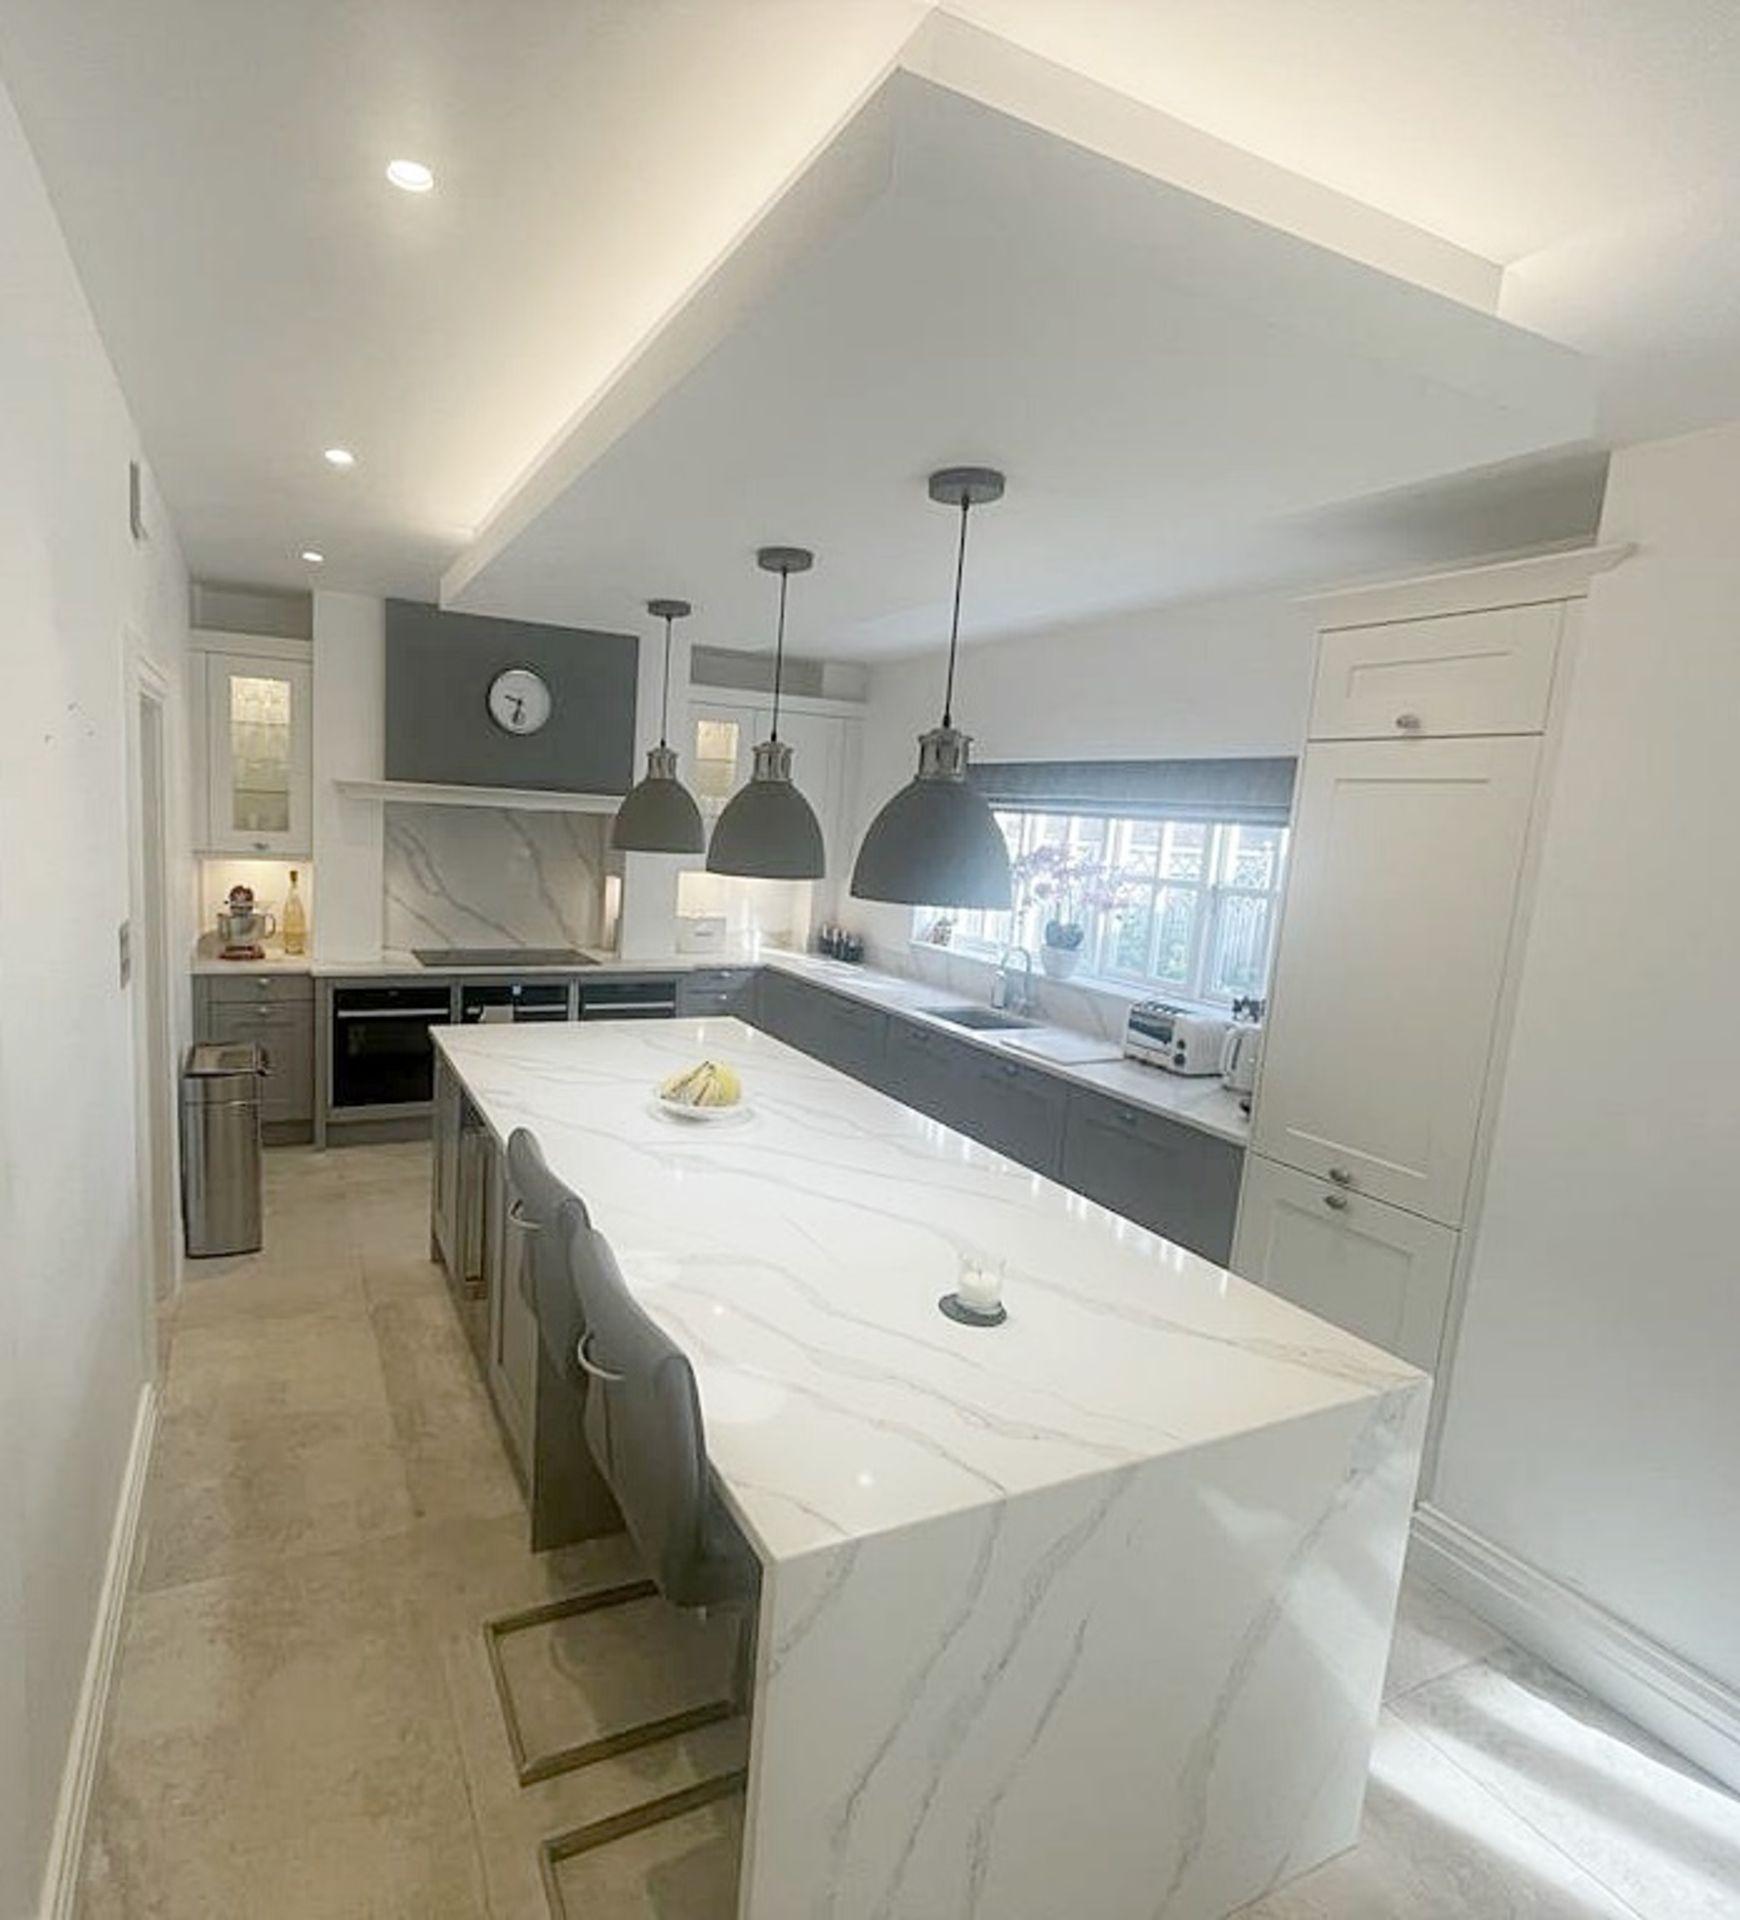 1 x SIEMATIC Bespoke Shaker-style Fitted Kitchen, Utility Room, Appliances & Modern Quartz Surfaces - Image 75 of 99